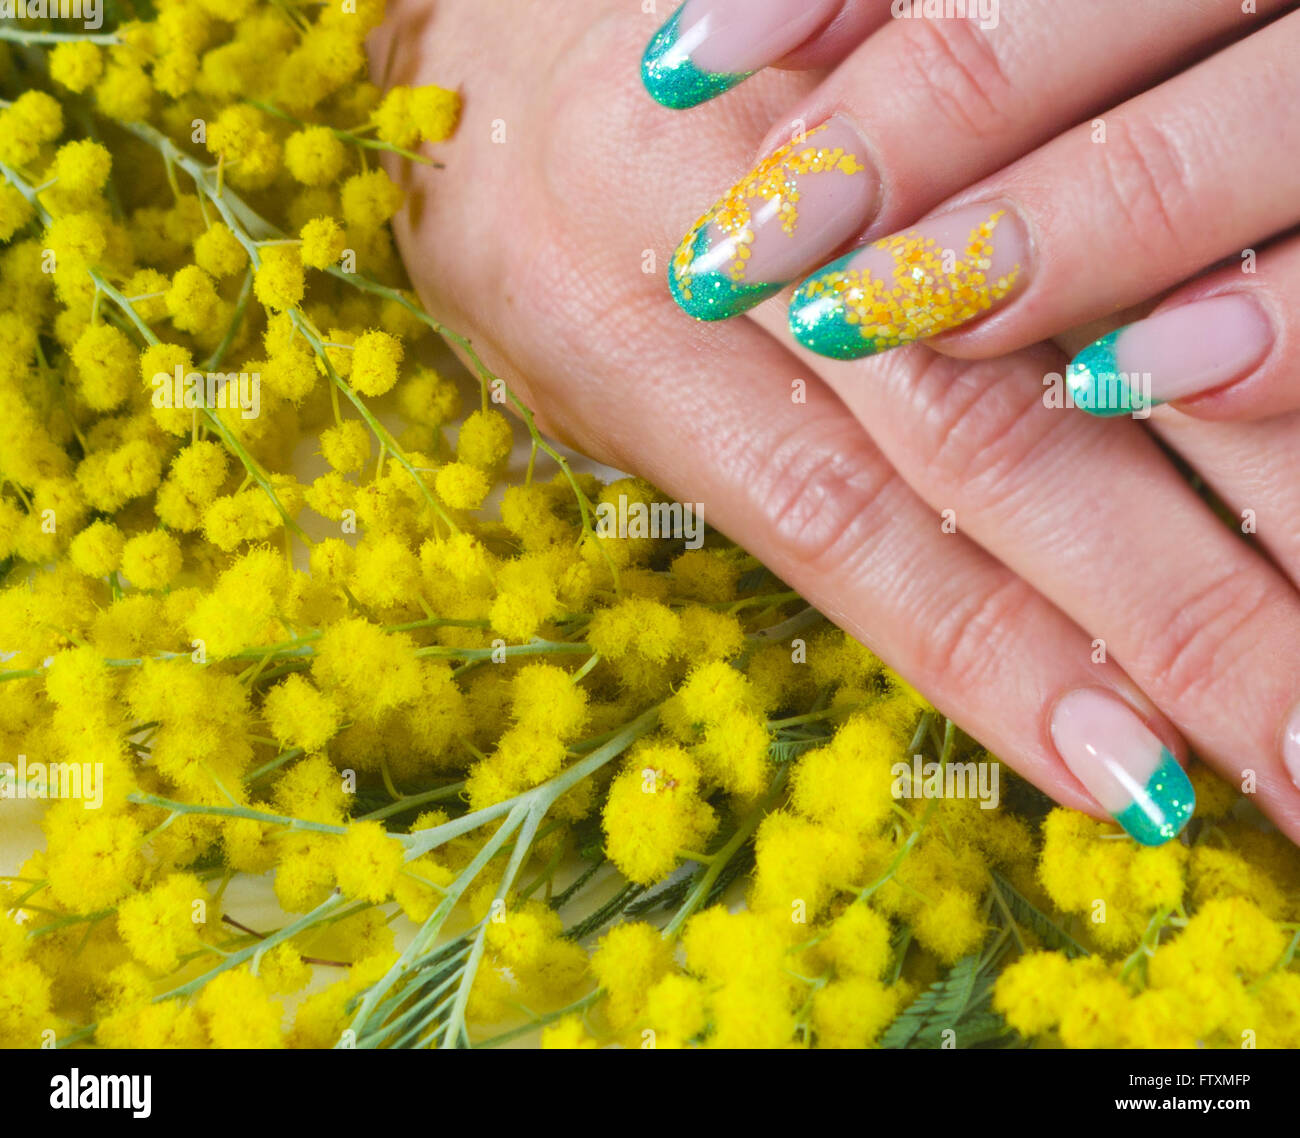 Floral Nail Art Is Very Trendy and Here Are 10 Inspirational Flower Desi...